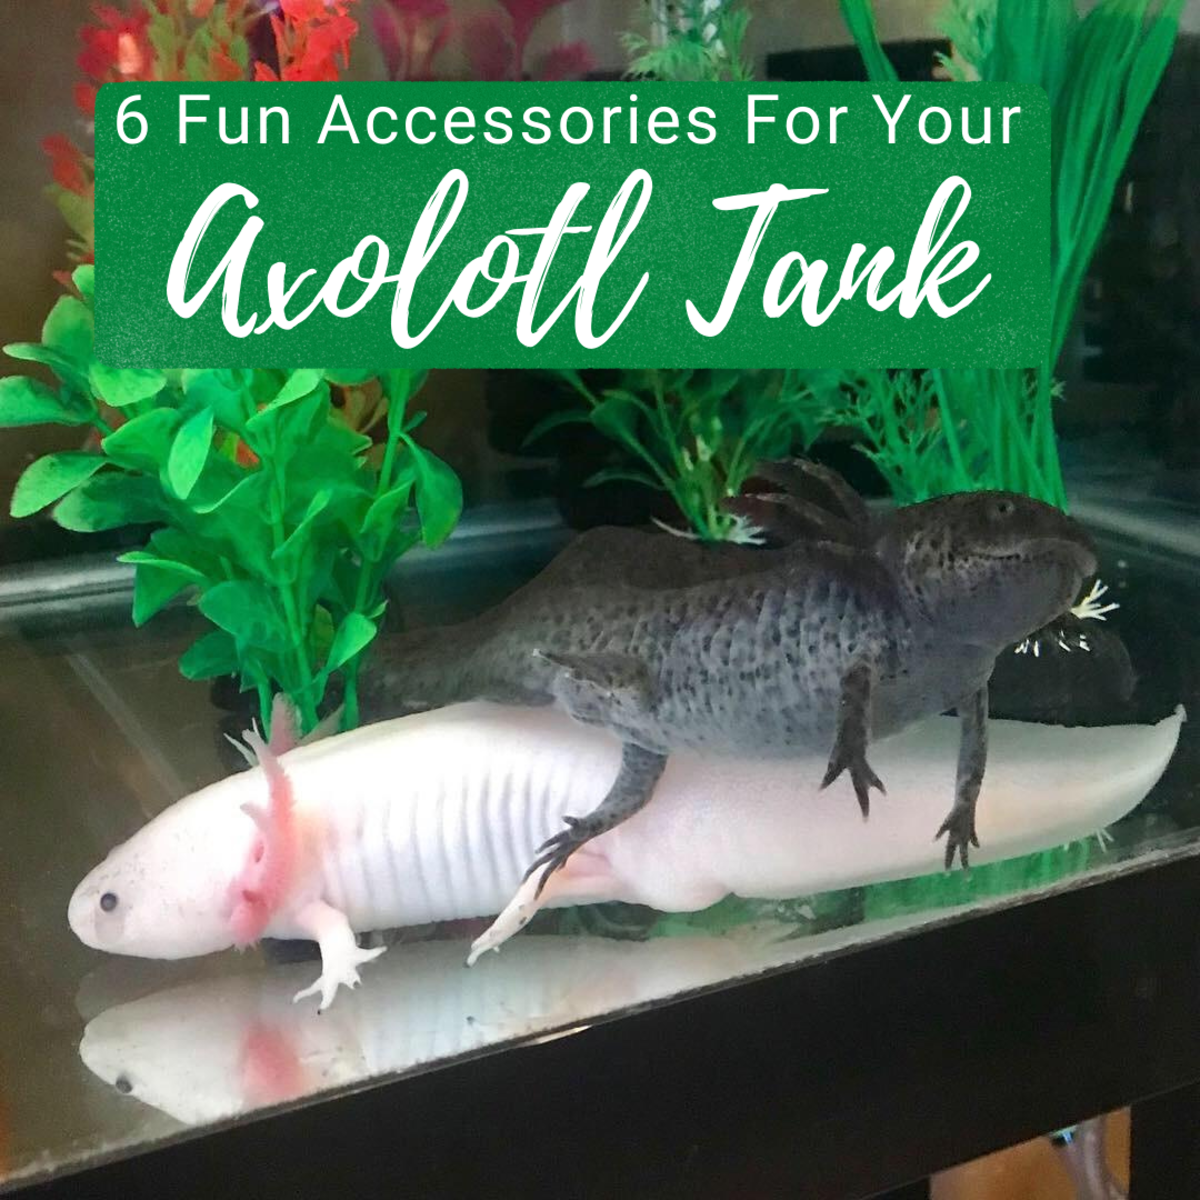 There are plenty of things you can do to add enrichment to your axolotl tank.